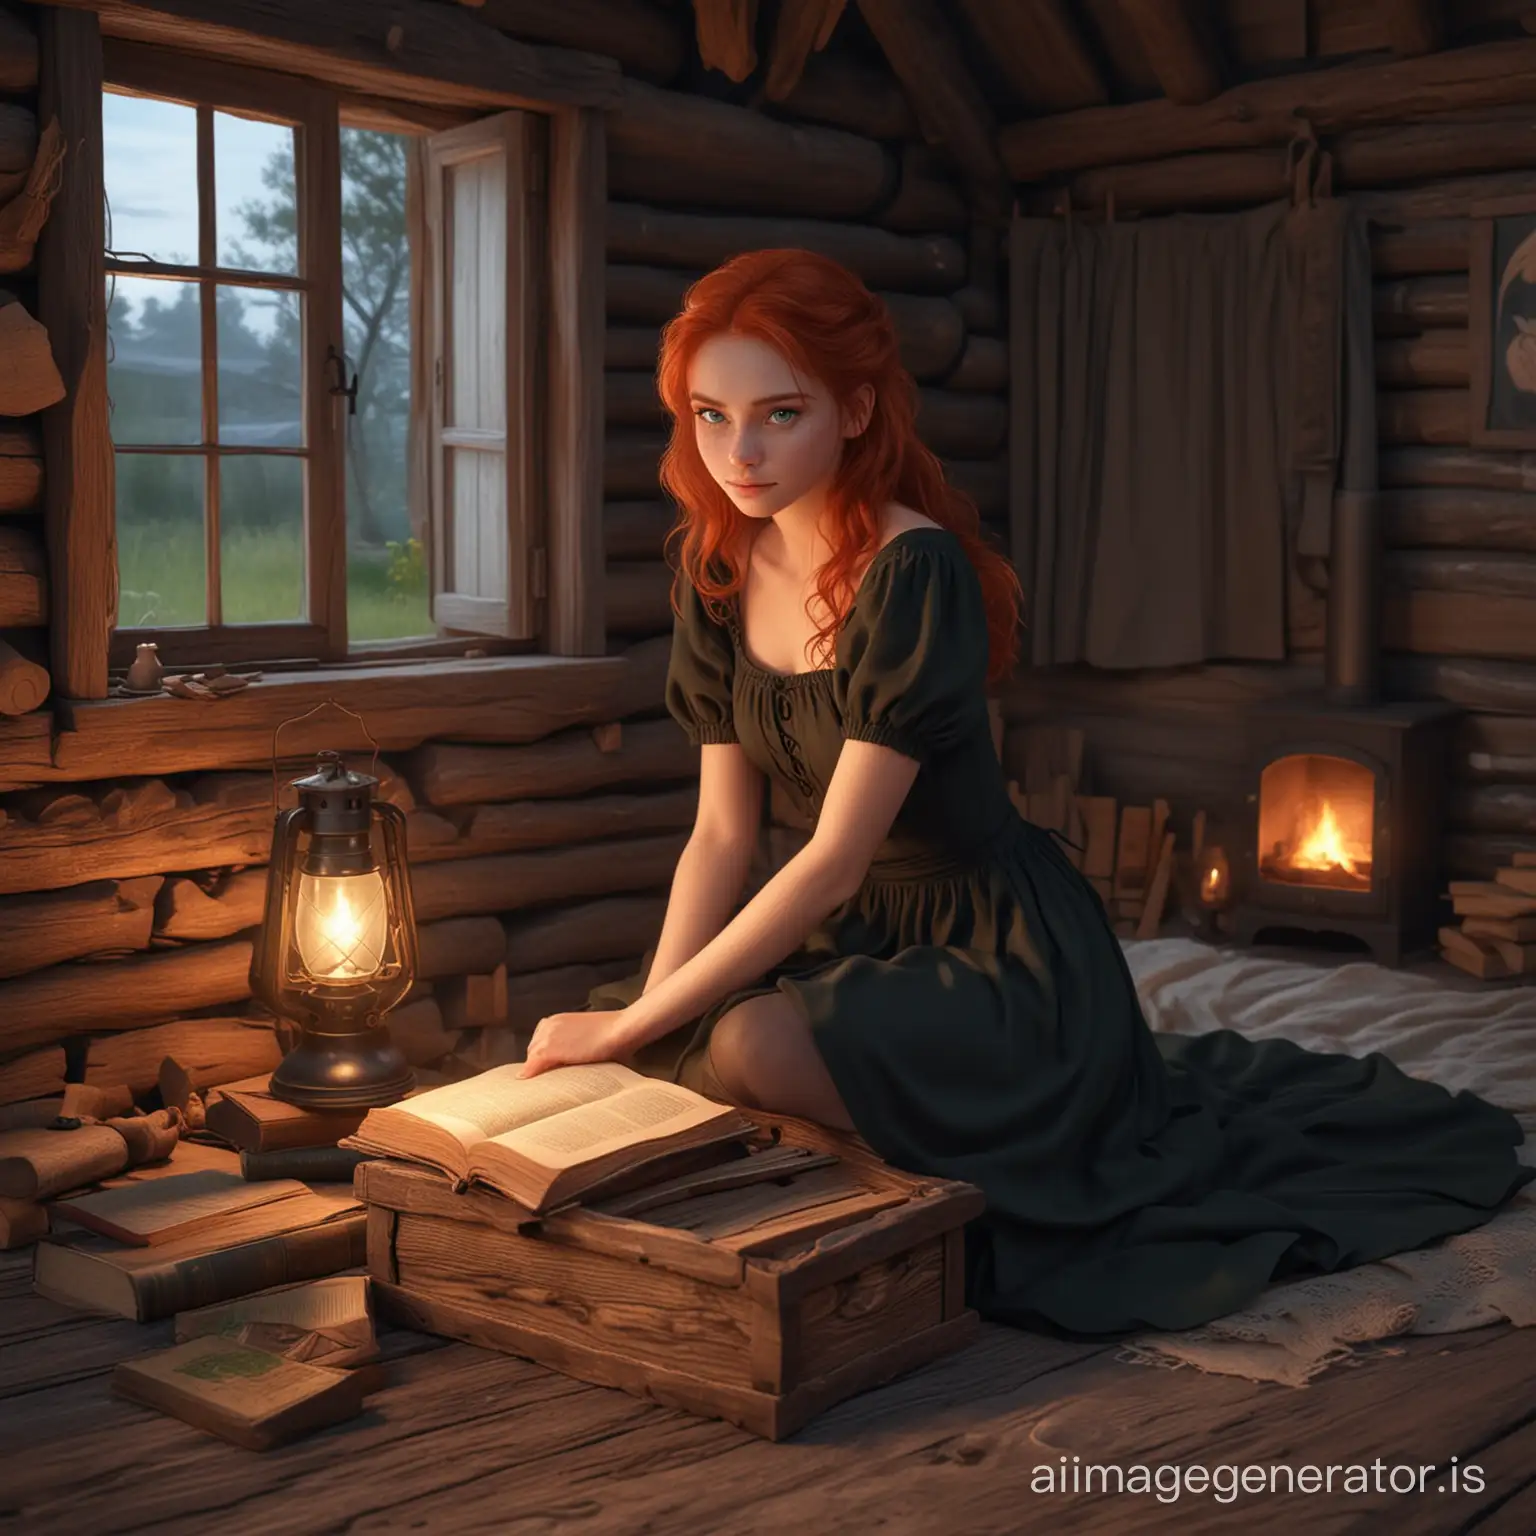 An adult girl with red hair and green eyes is very cute, in a black dress, sitting on a bed, next to there is a wooden box from which she takes out an old book, against the backdrop of an ancient interior of a log hut, night outside the window, cartoon style, 3D rendering, magical atmosphere